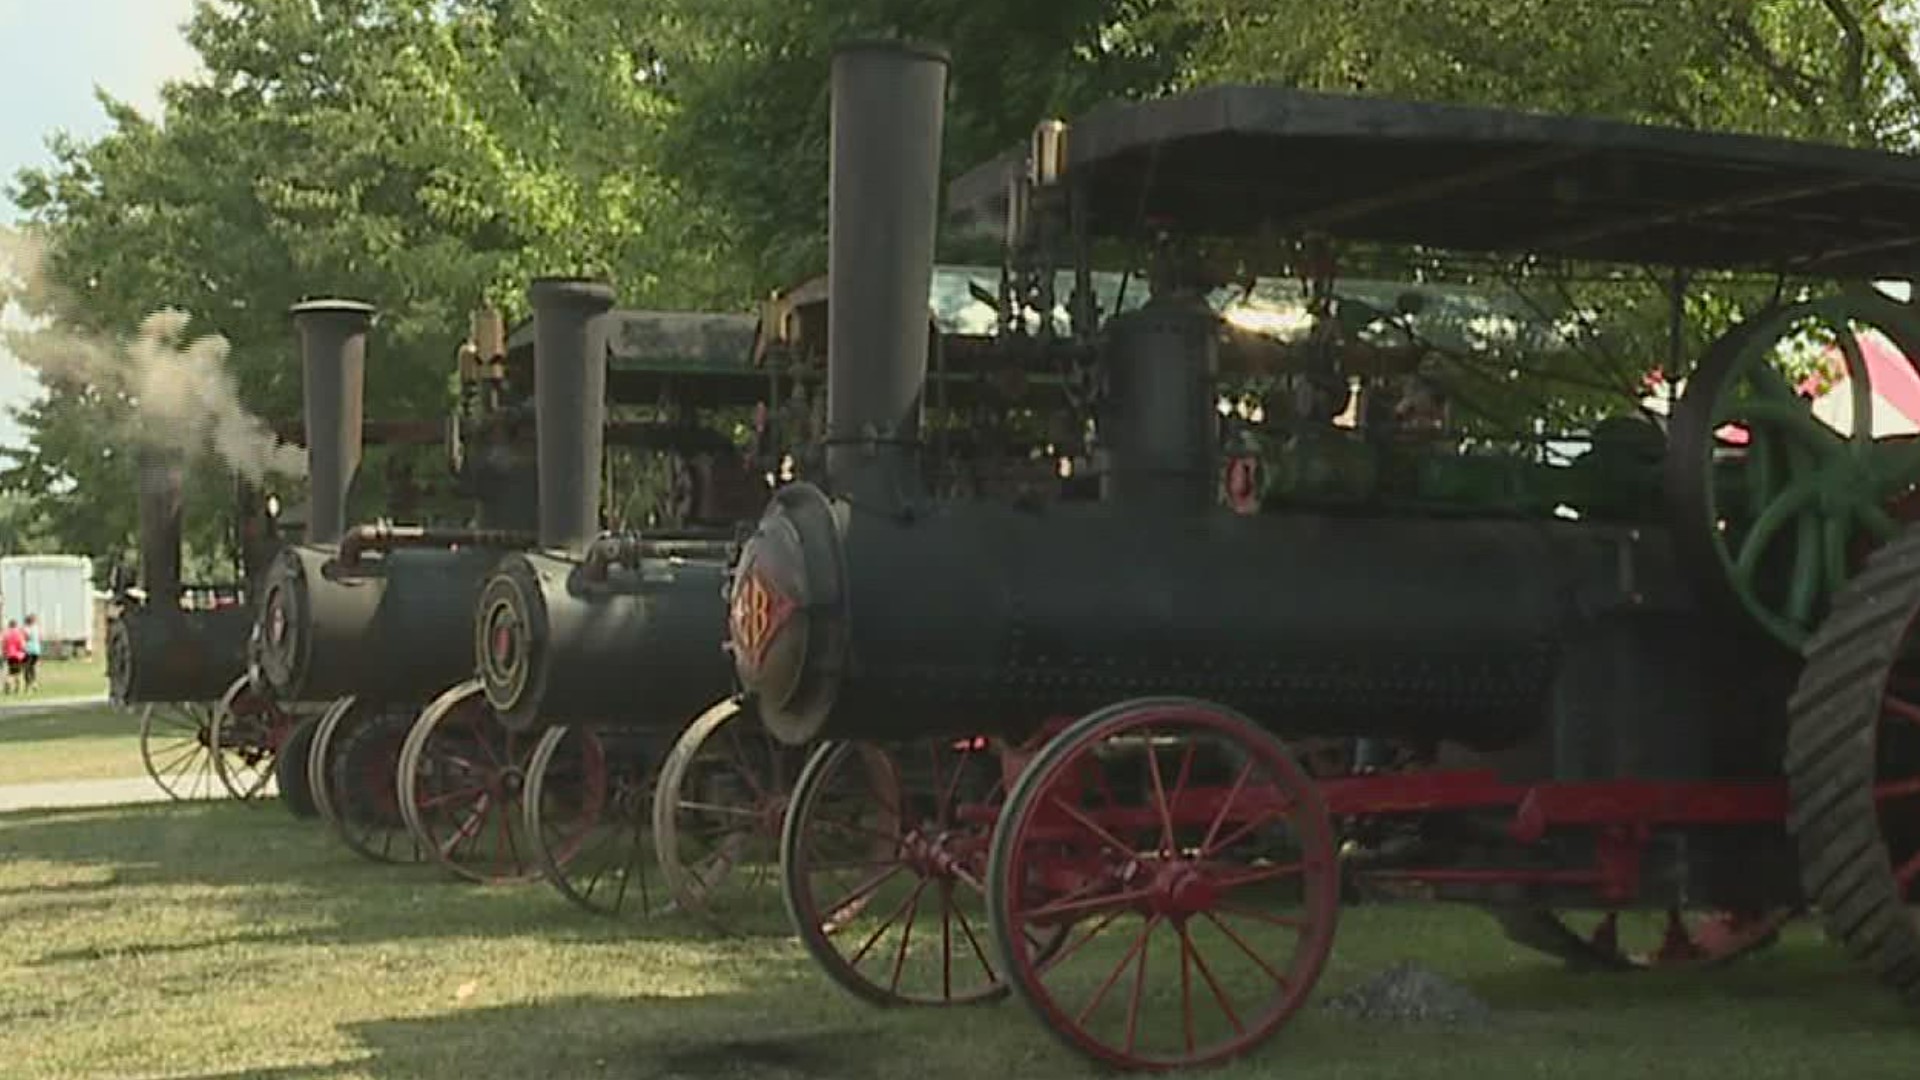 64th annual Steam Show returns to Cumberland County